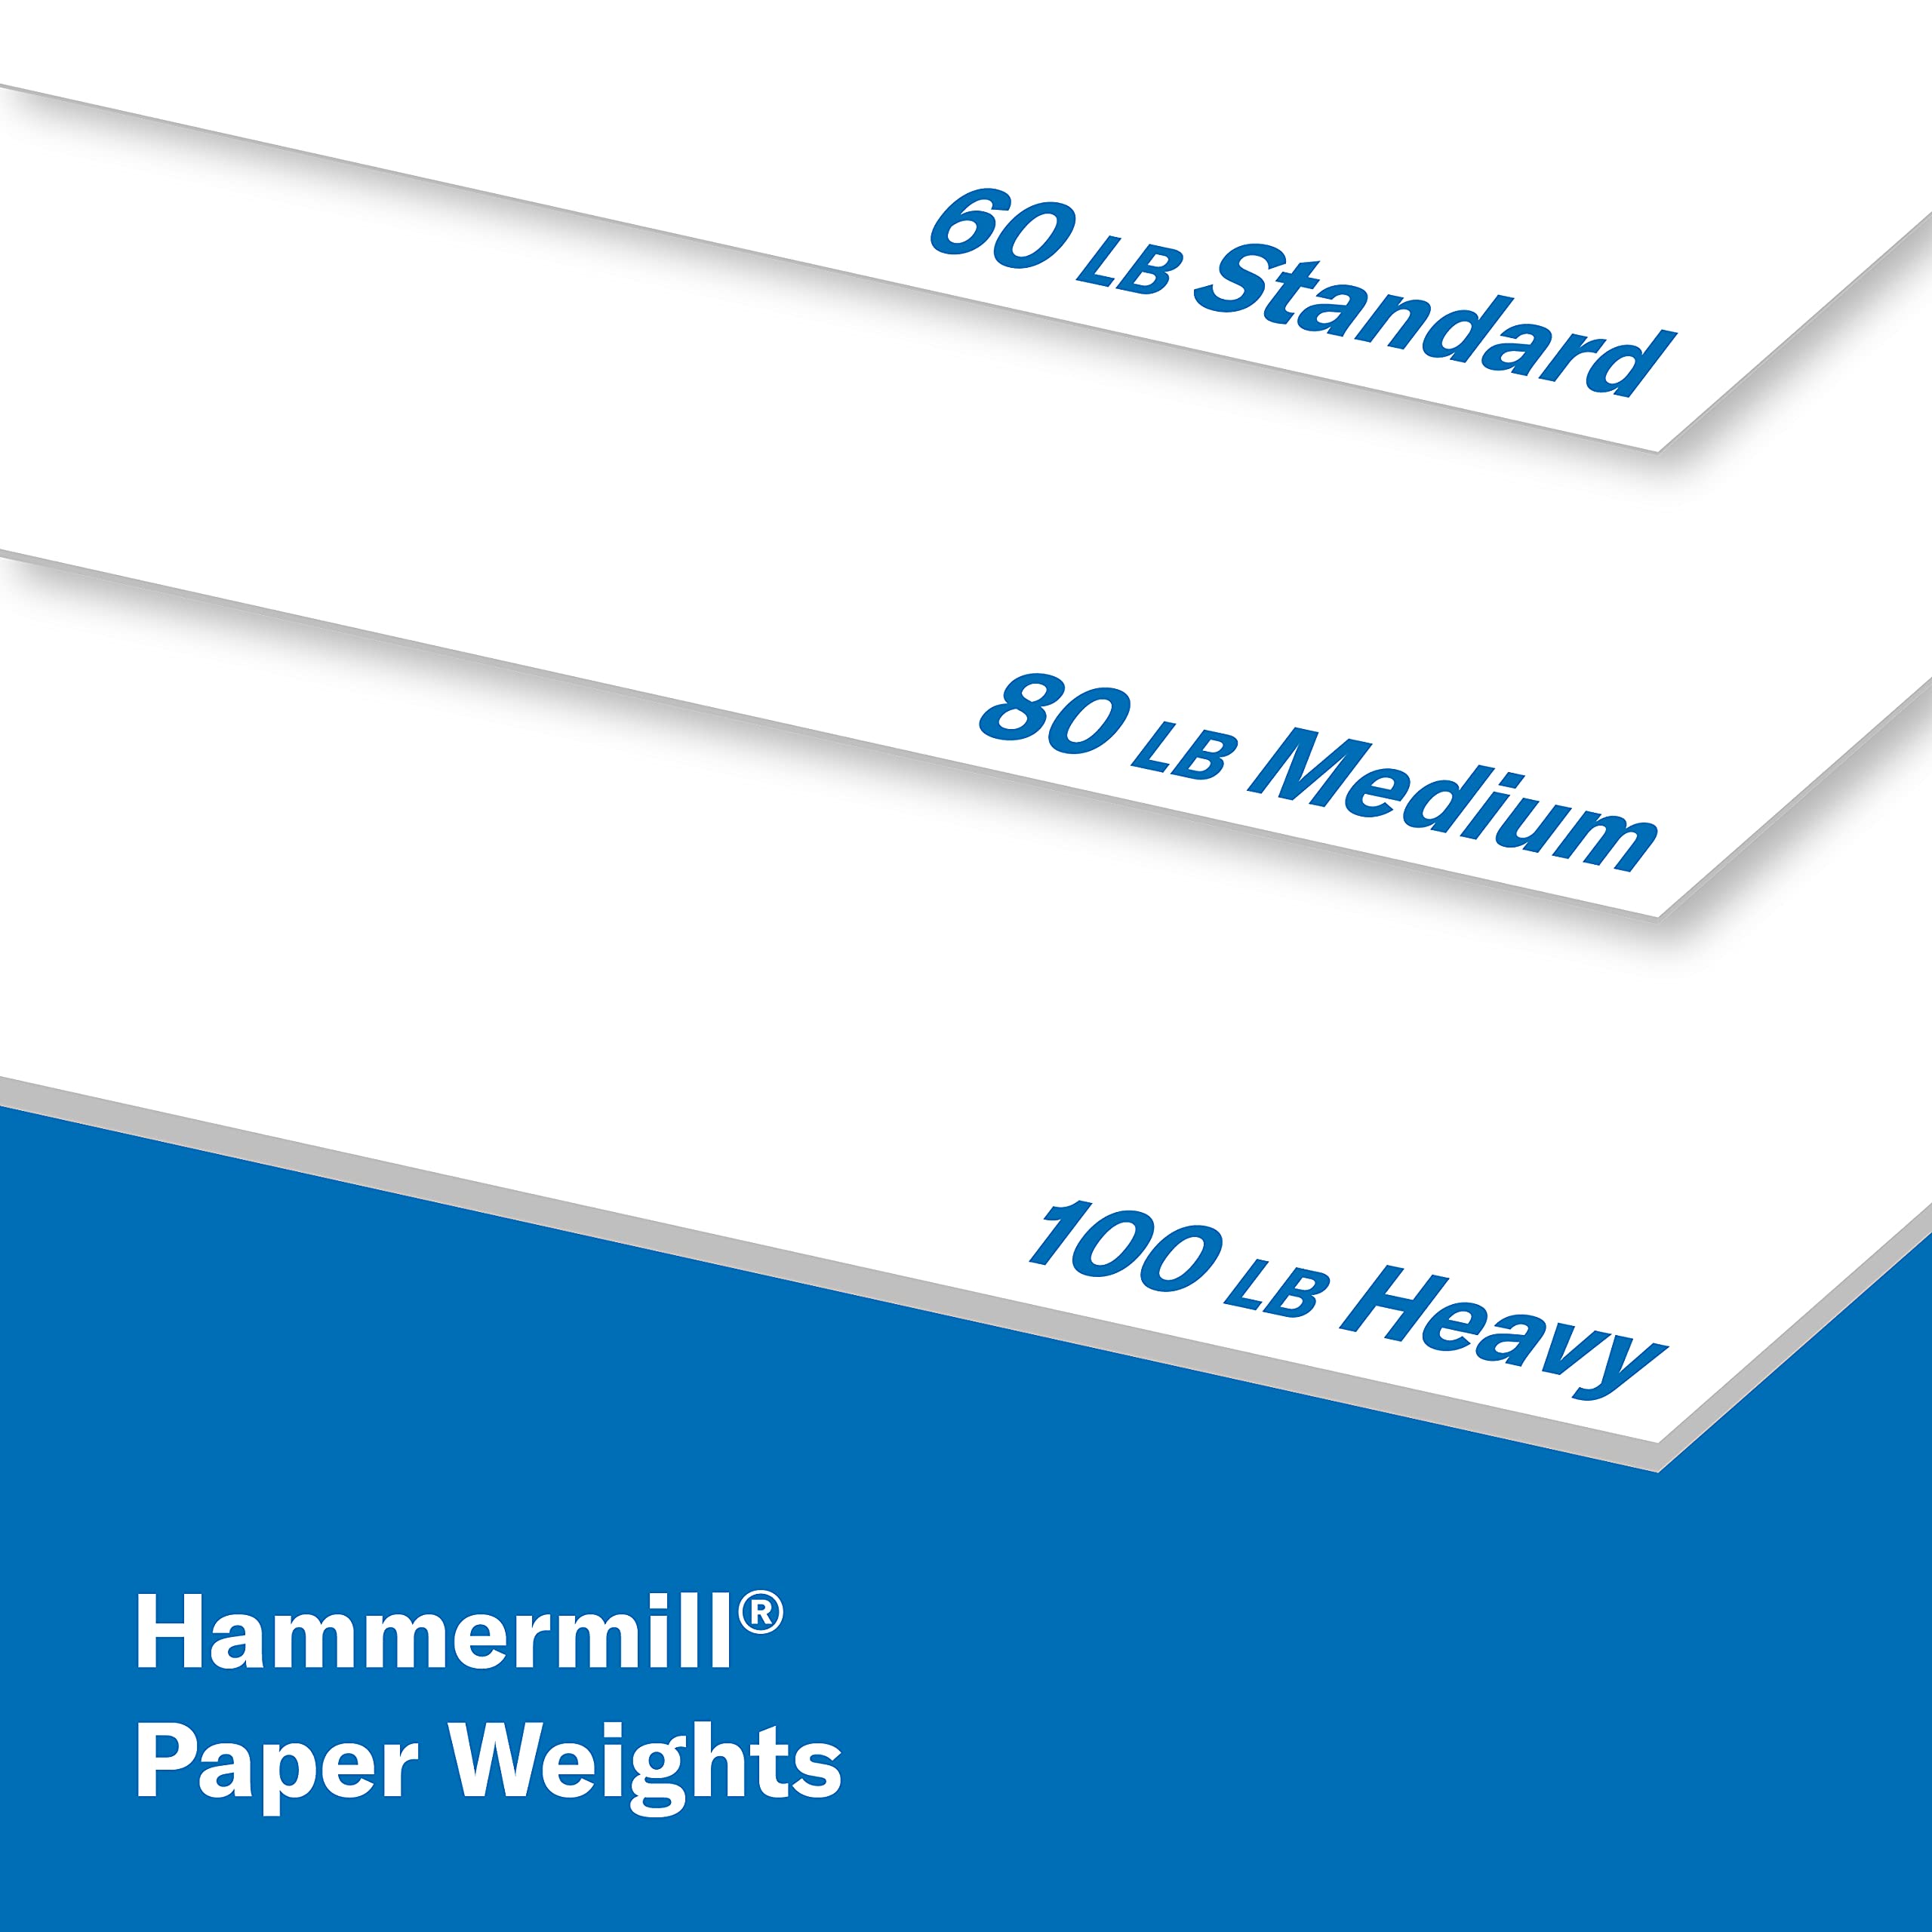 Hammermill Cardstock, Premium Color Copy, 80 lb, 18 x 12-1 Pack (250 Sheets) - 100 Bright, Made in the USA Card Stock, 133200R, White